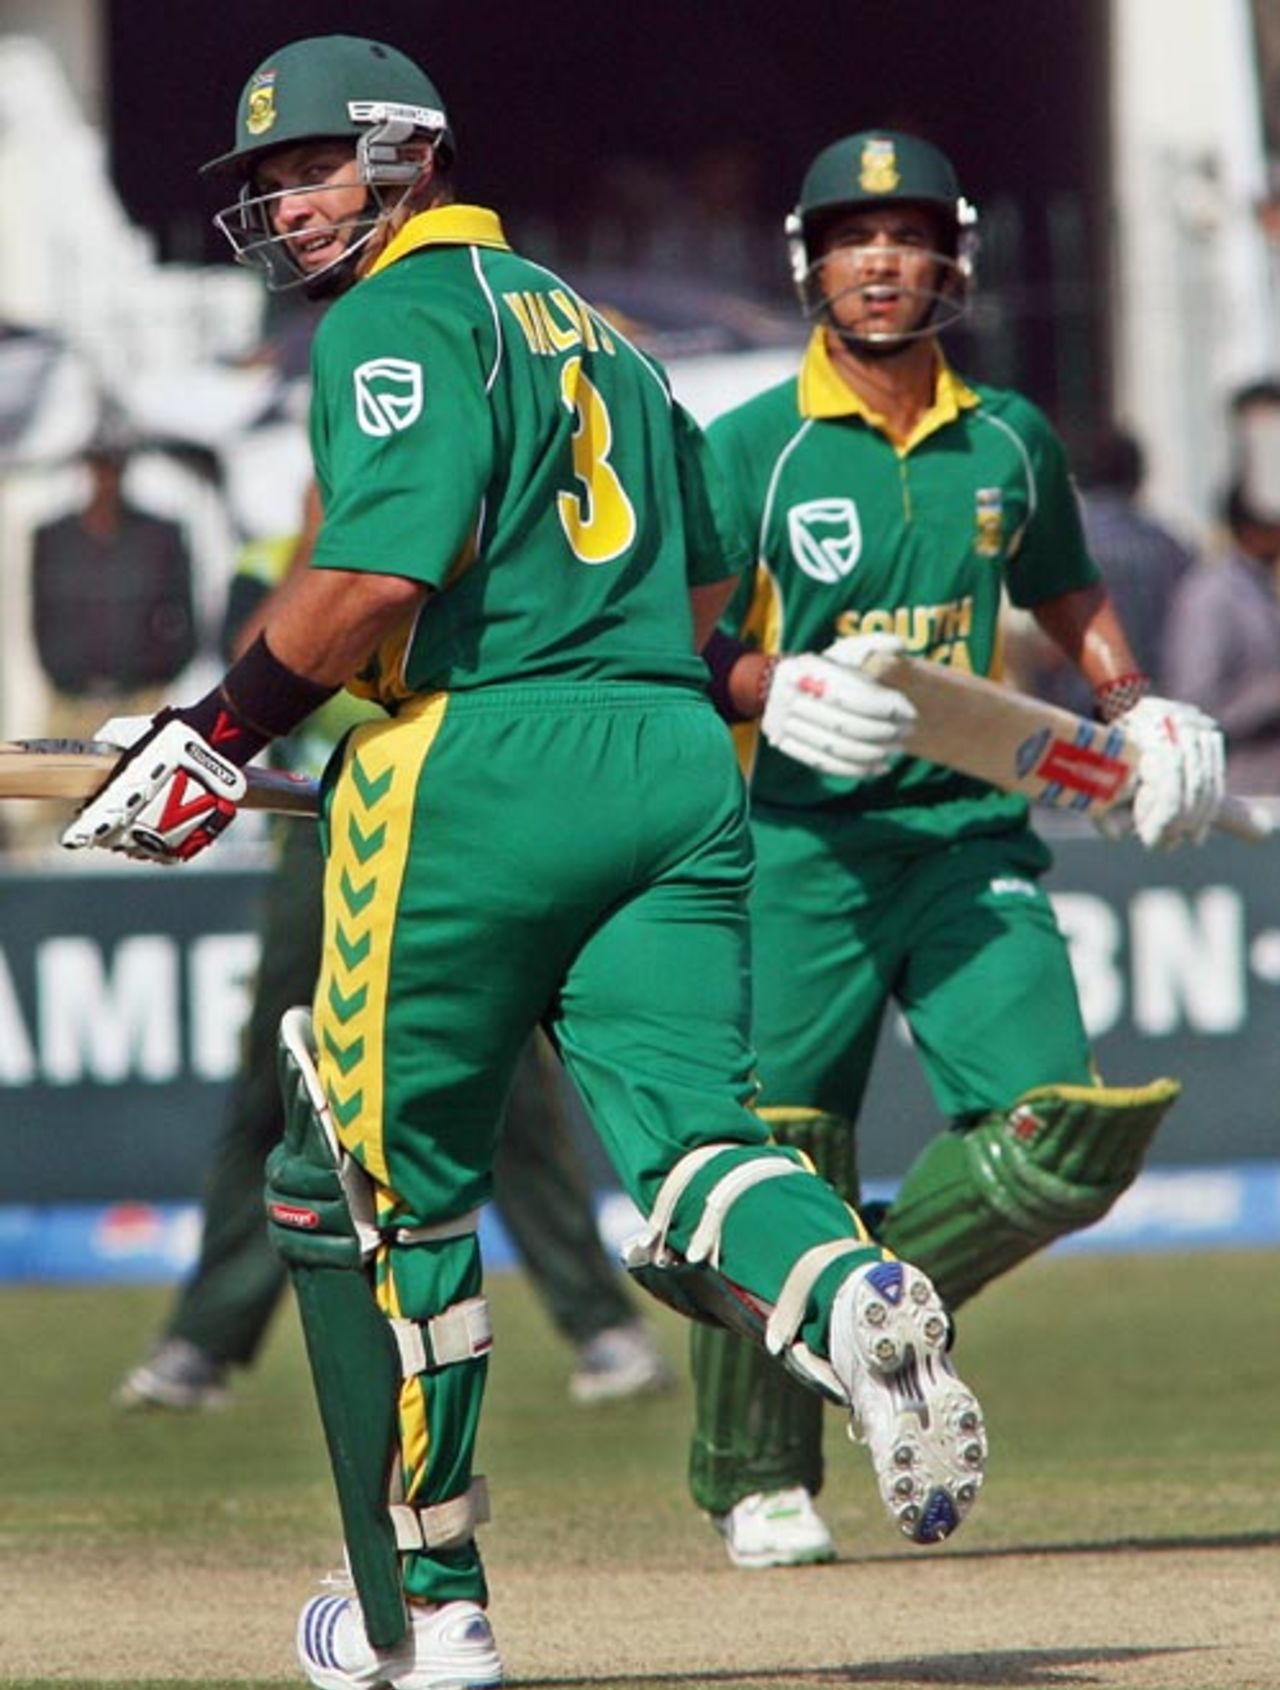 Jacques Kallis and Jean-Paul Duminy pick up a single during their 75-run stand, Pakistan v South Africa, 5th ODI, Lahore, October 29, 2007 